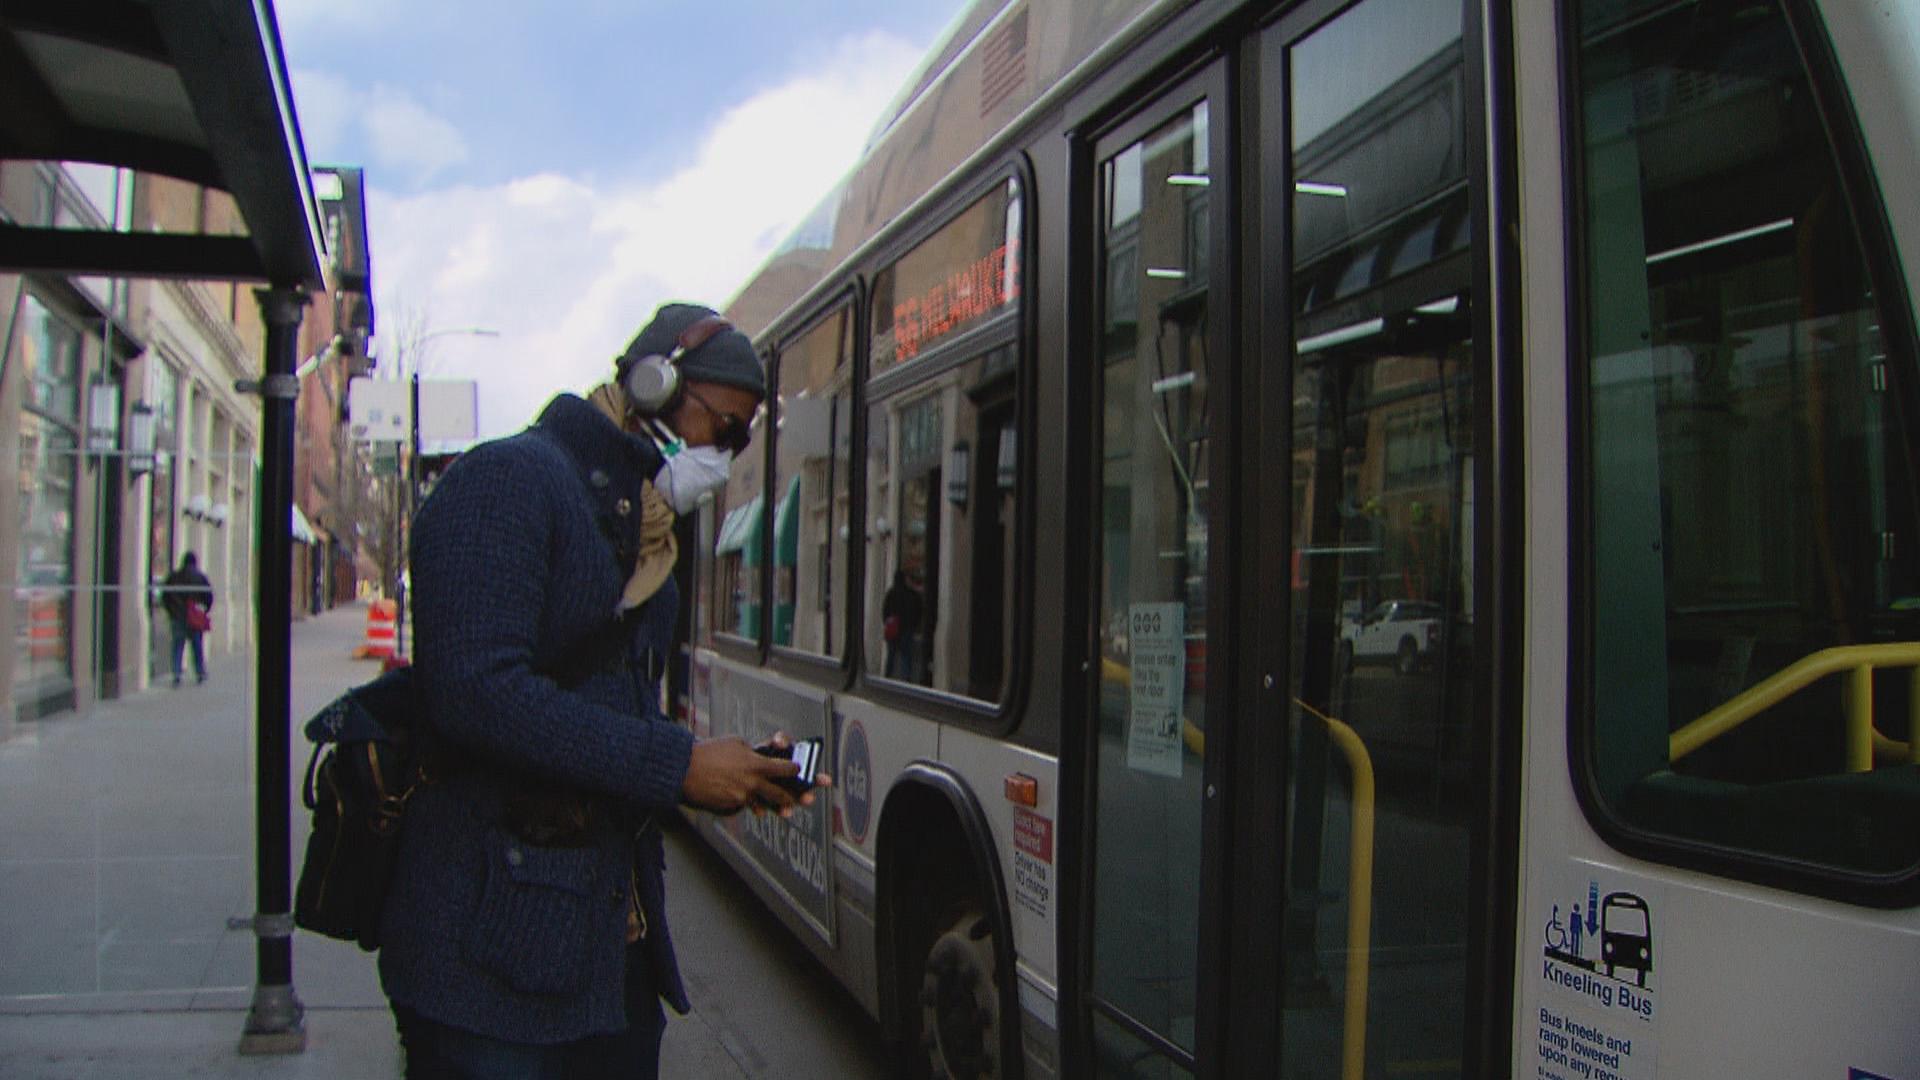 A person wearing a face mask boards a CTA bus in Chicago. (WTTW News)